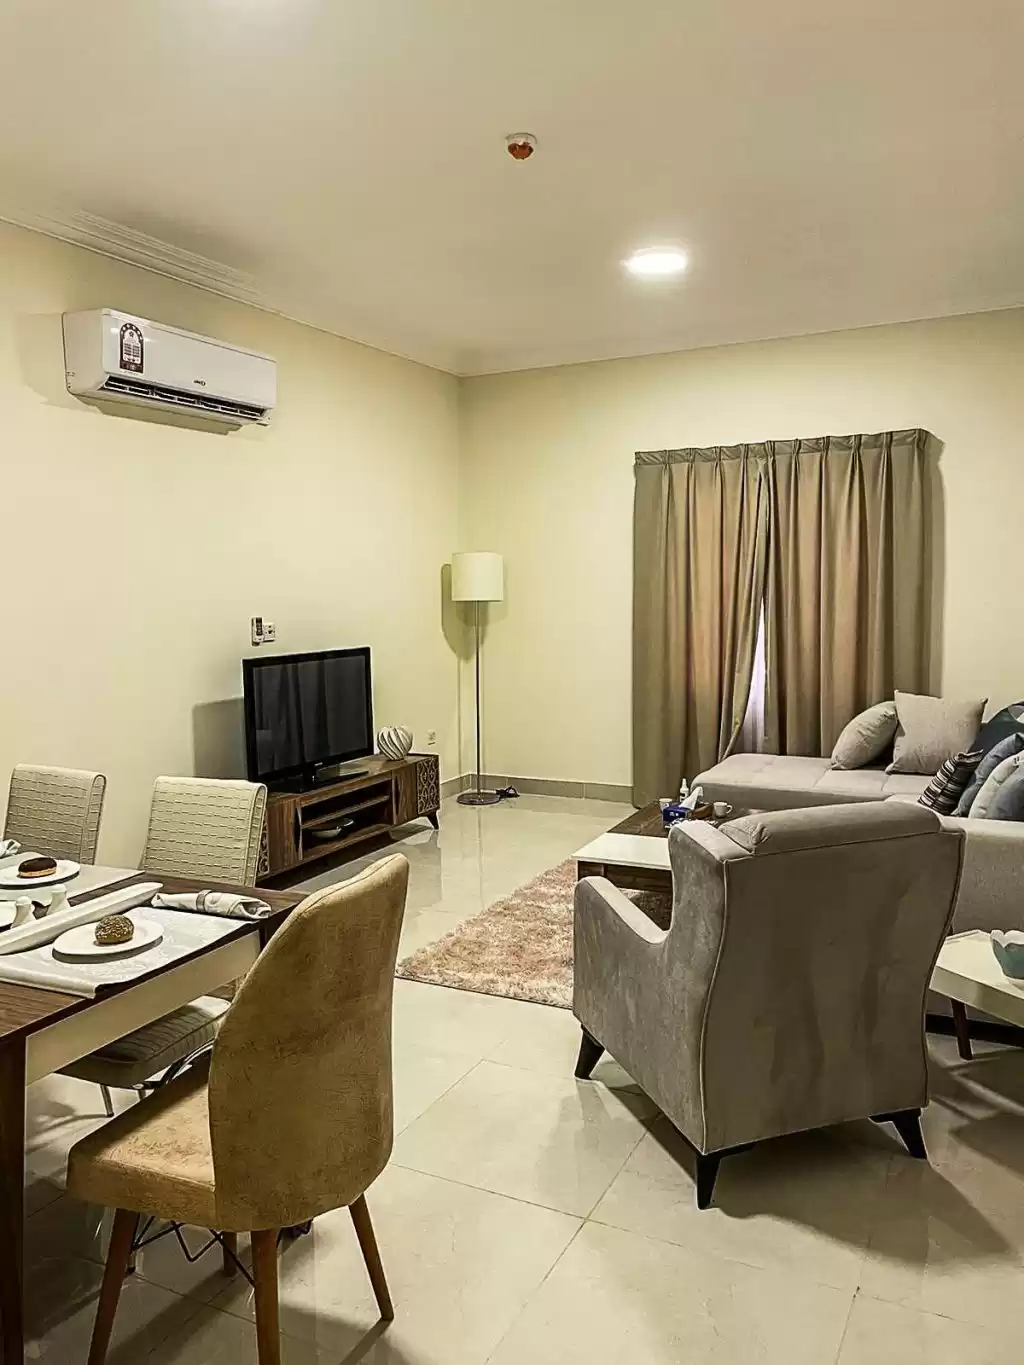 Residential Ready Property 2 Bedrooms F/F Apartment  for rent in Al Sadd , Doha #14531 - 1  image 